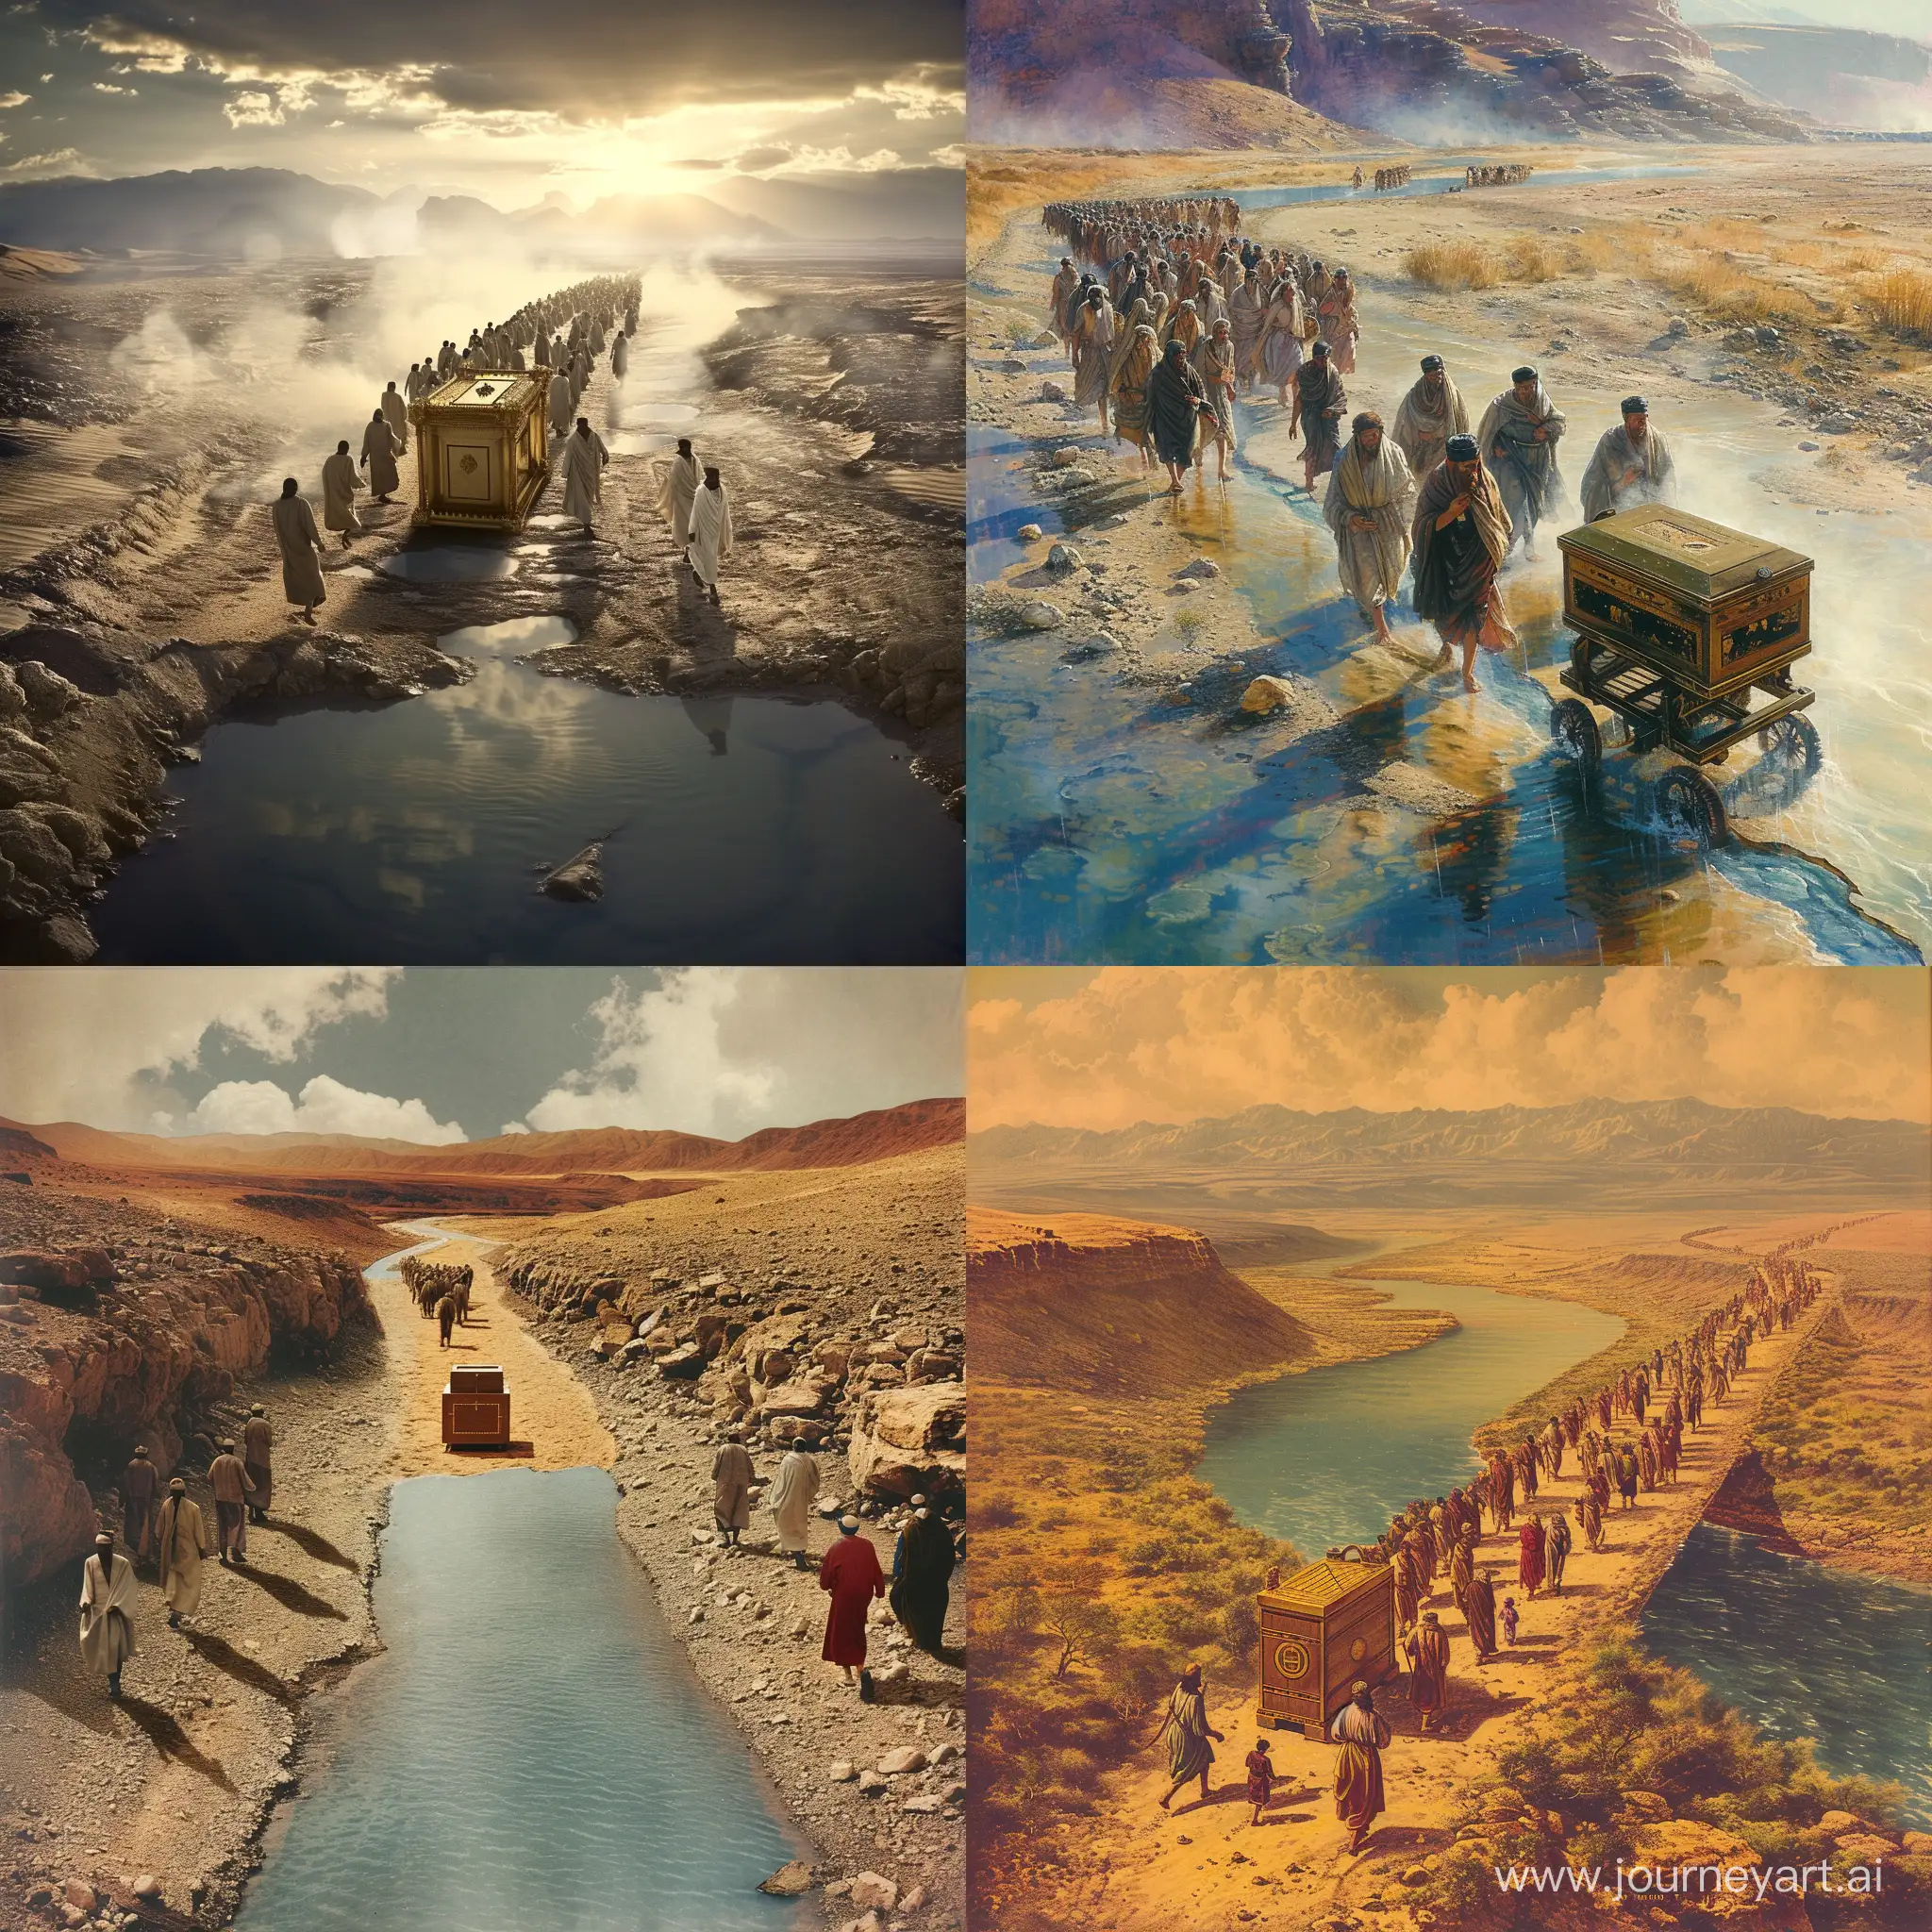 miracle of israelites crossing the jordan. Ark of the covenant. Walking on dry land with river split into two